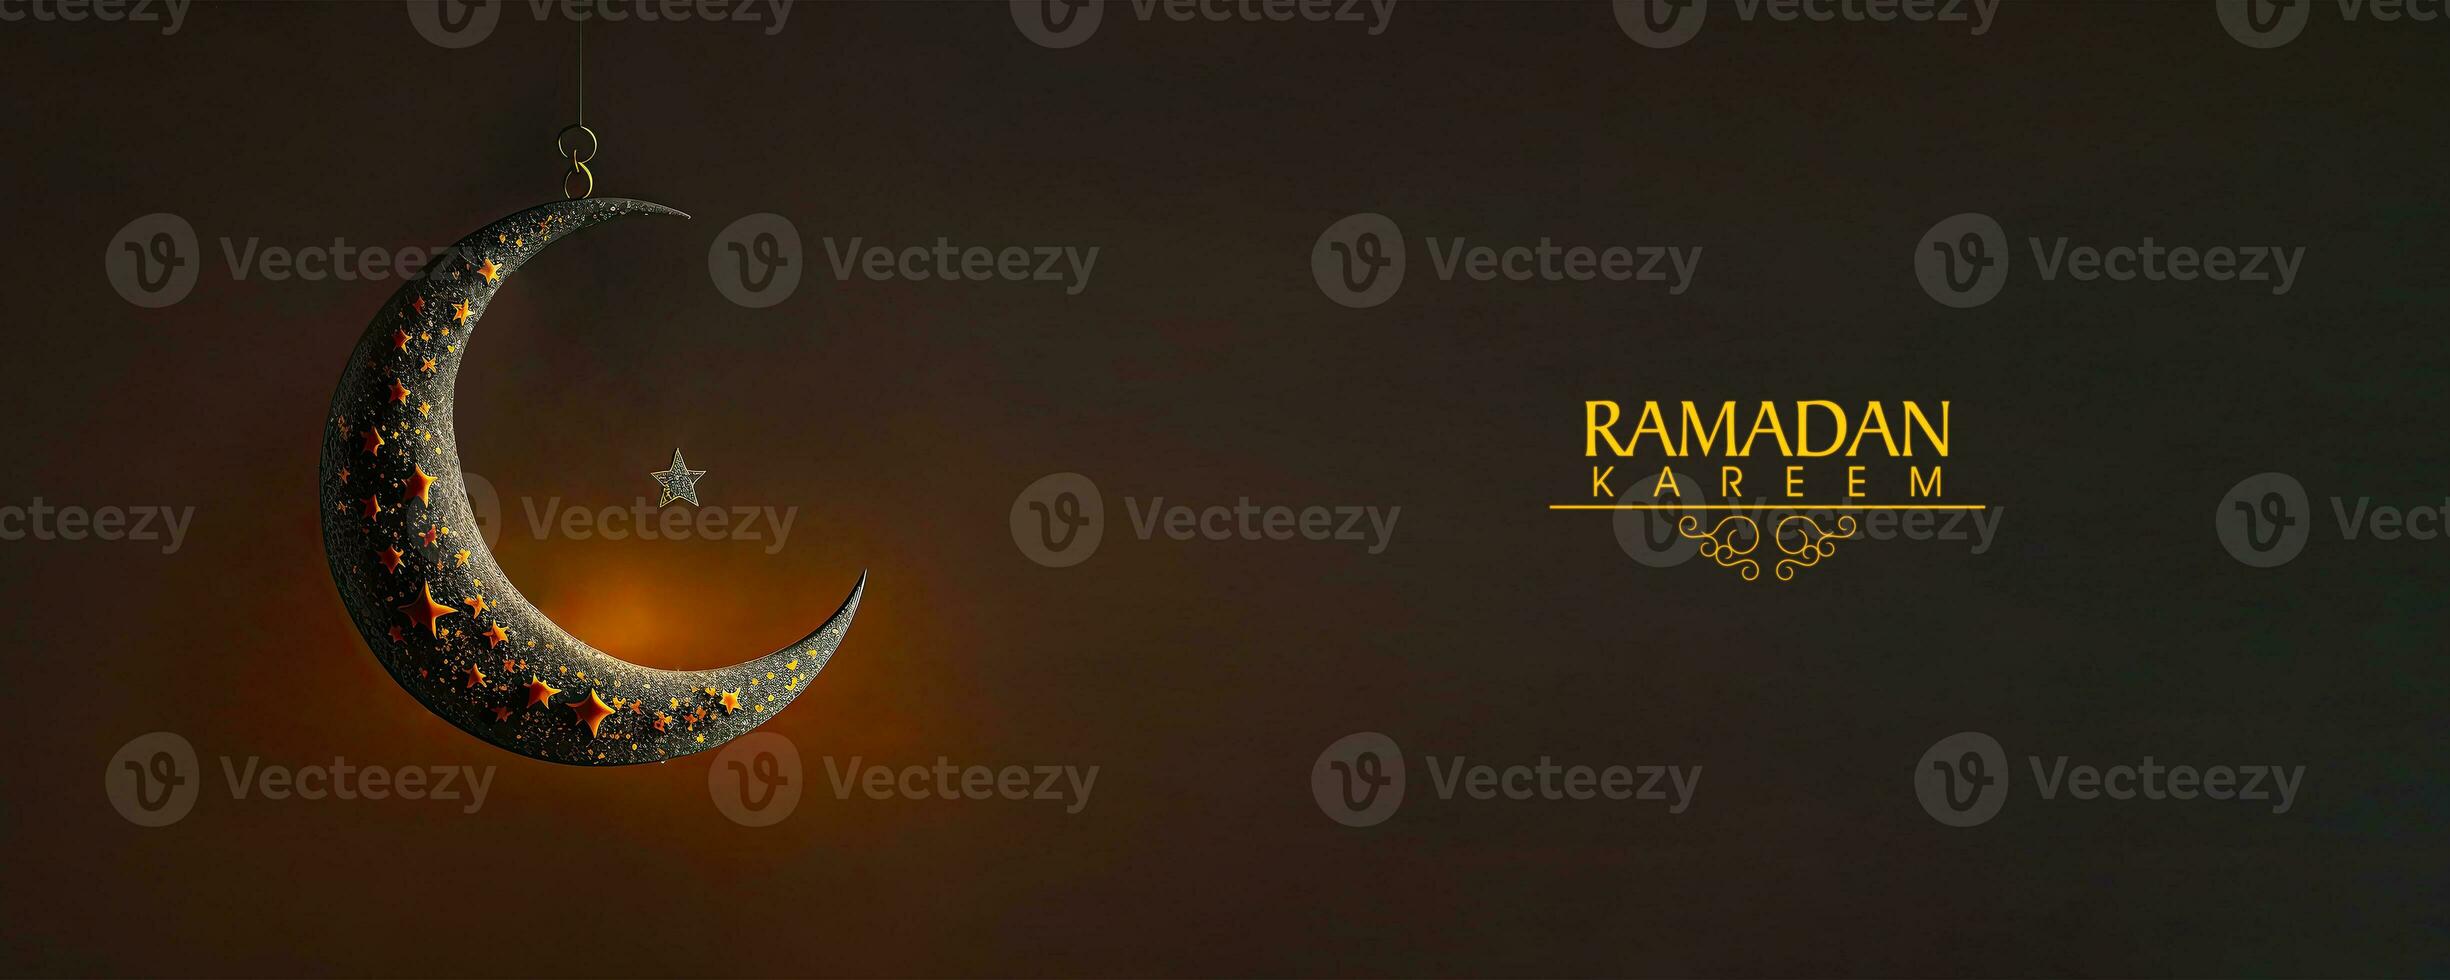 Ramadan Kareem Banner Design With 3D Render of Hanging Crescent Moon And Star On Dark Background. photo